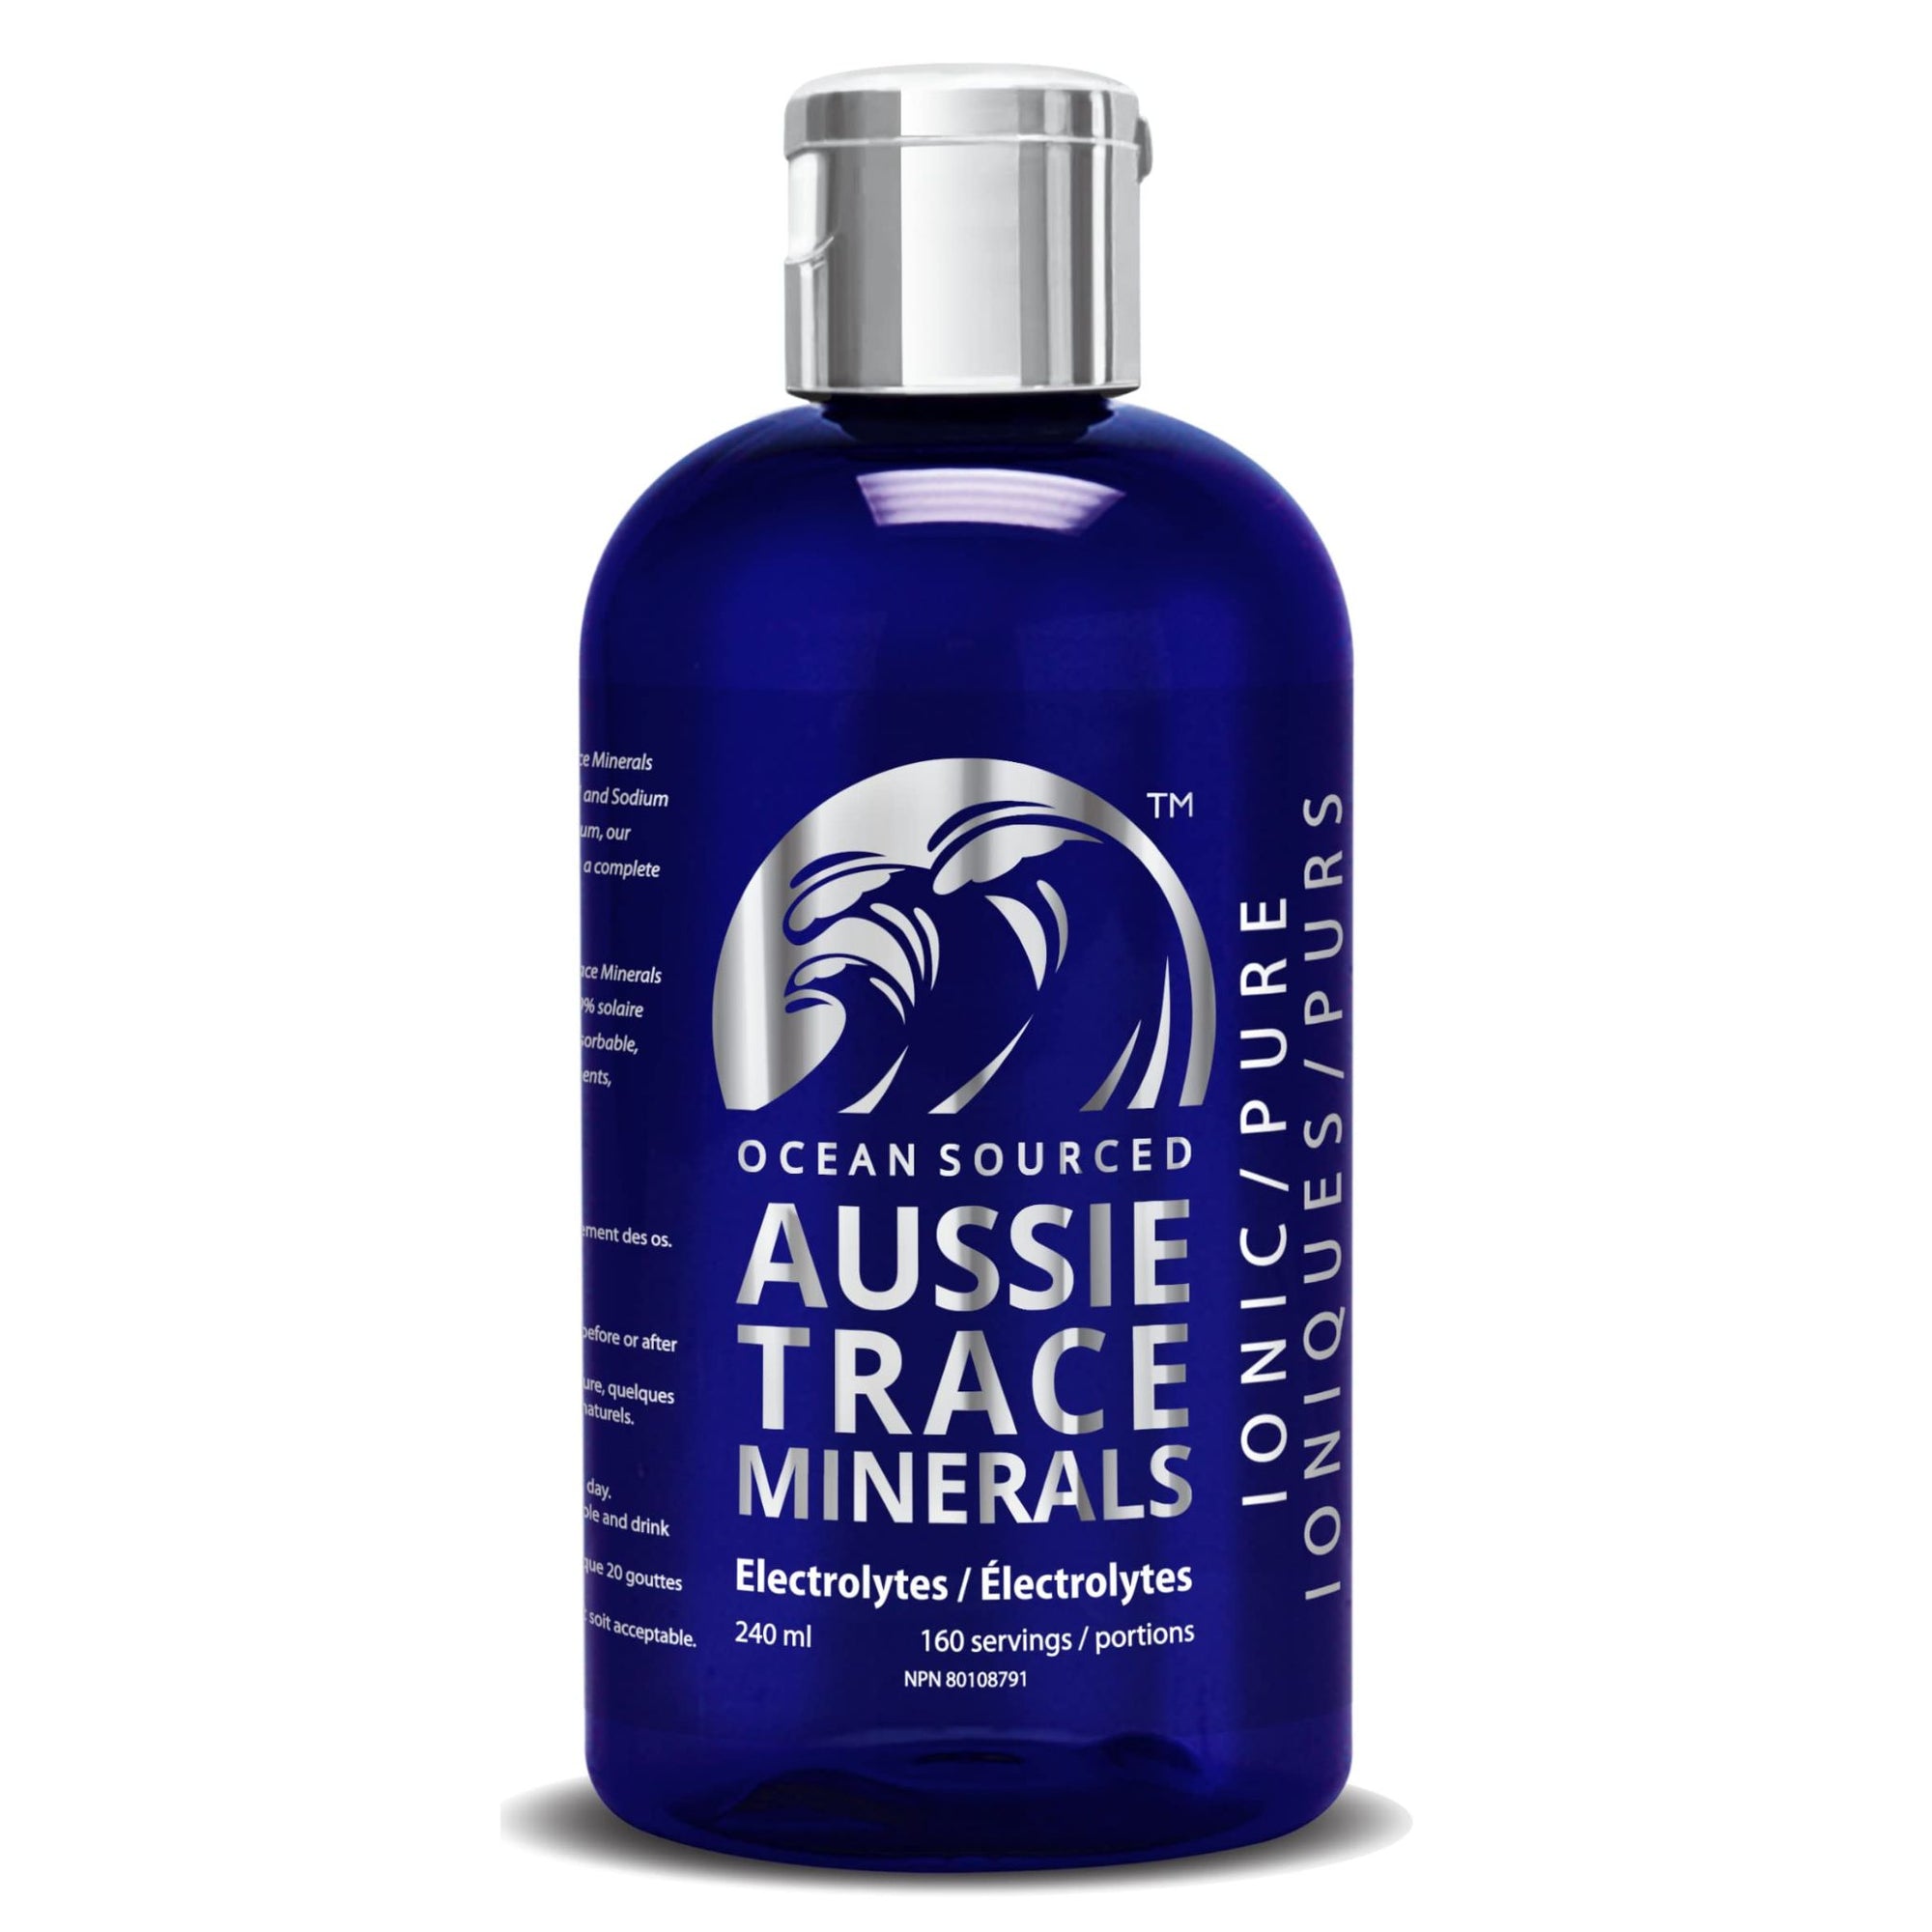 Aussie Trace Minerals 240ml bottle - Ocean sourced, Ionic / Pure, 160 servings per bottle - Natural electrolytes , 